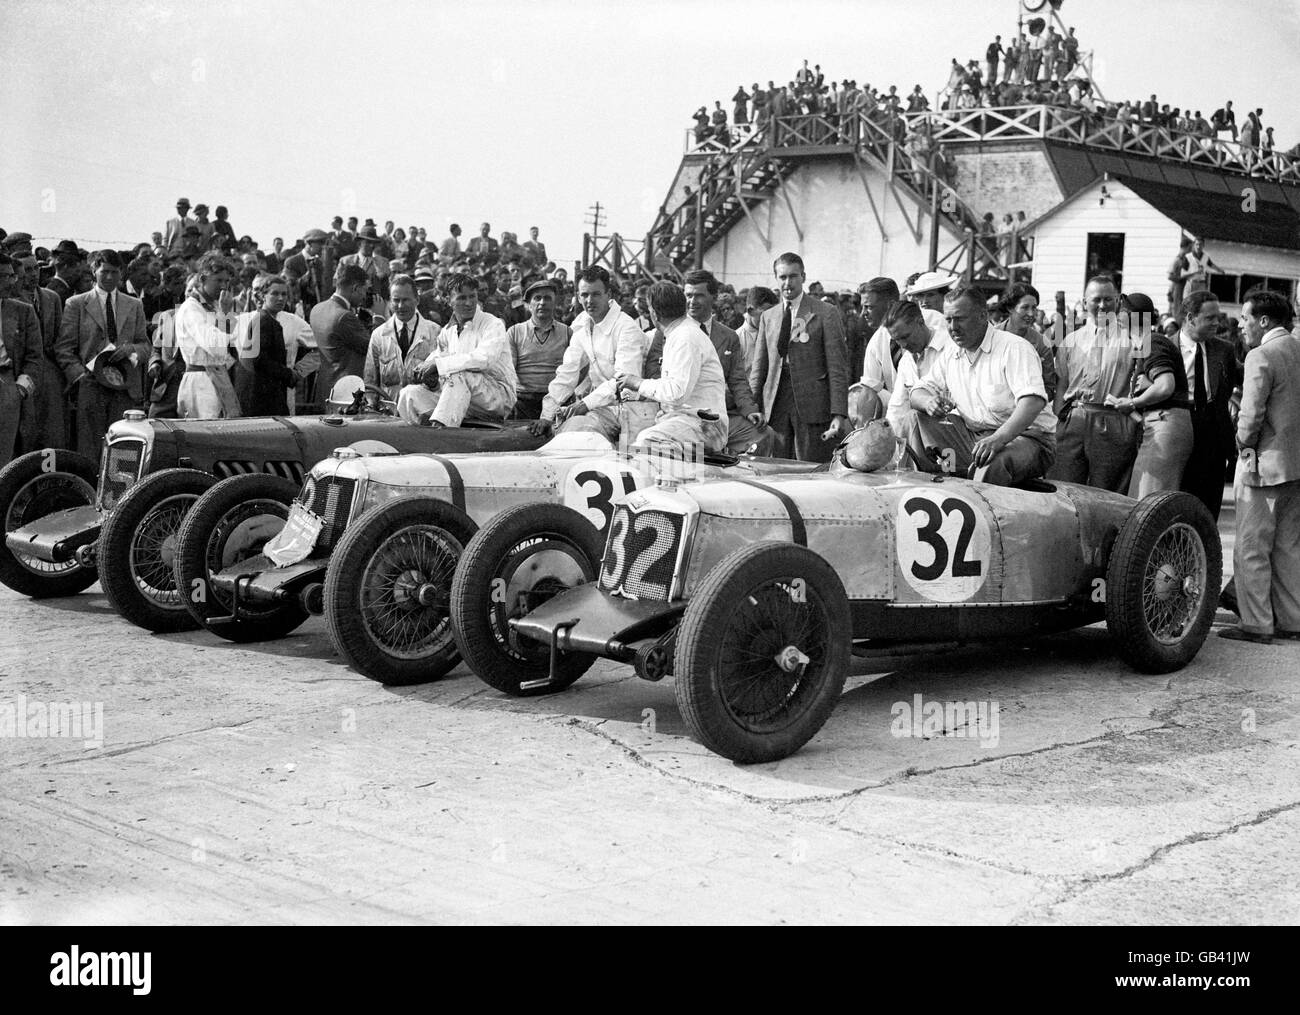 Motor Racing - British Empire Trophy - Brooklands. The top three drivers and their cars after the race, with winner Freddie Dixon (right, in car 32) celebrating with a glass of champagne. Stock Photo